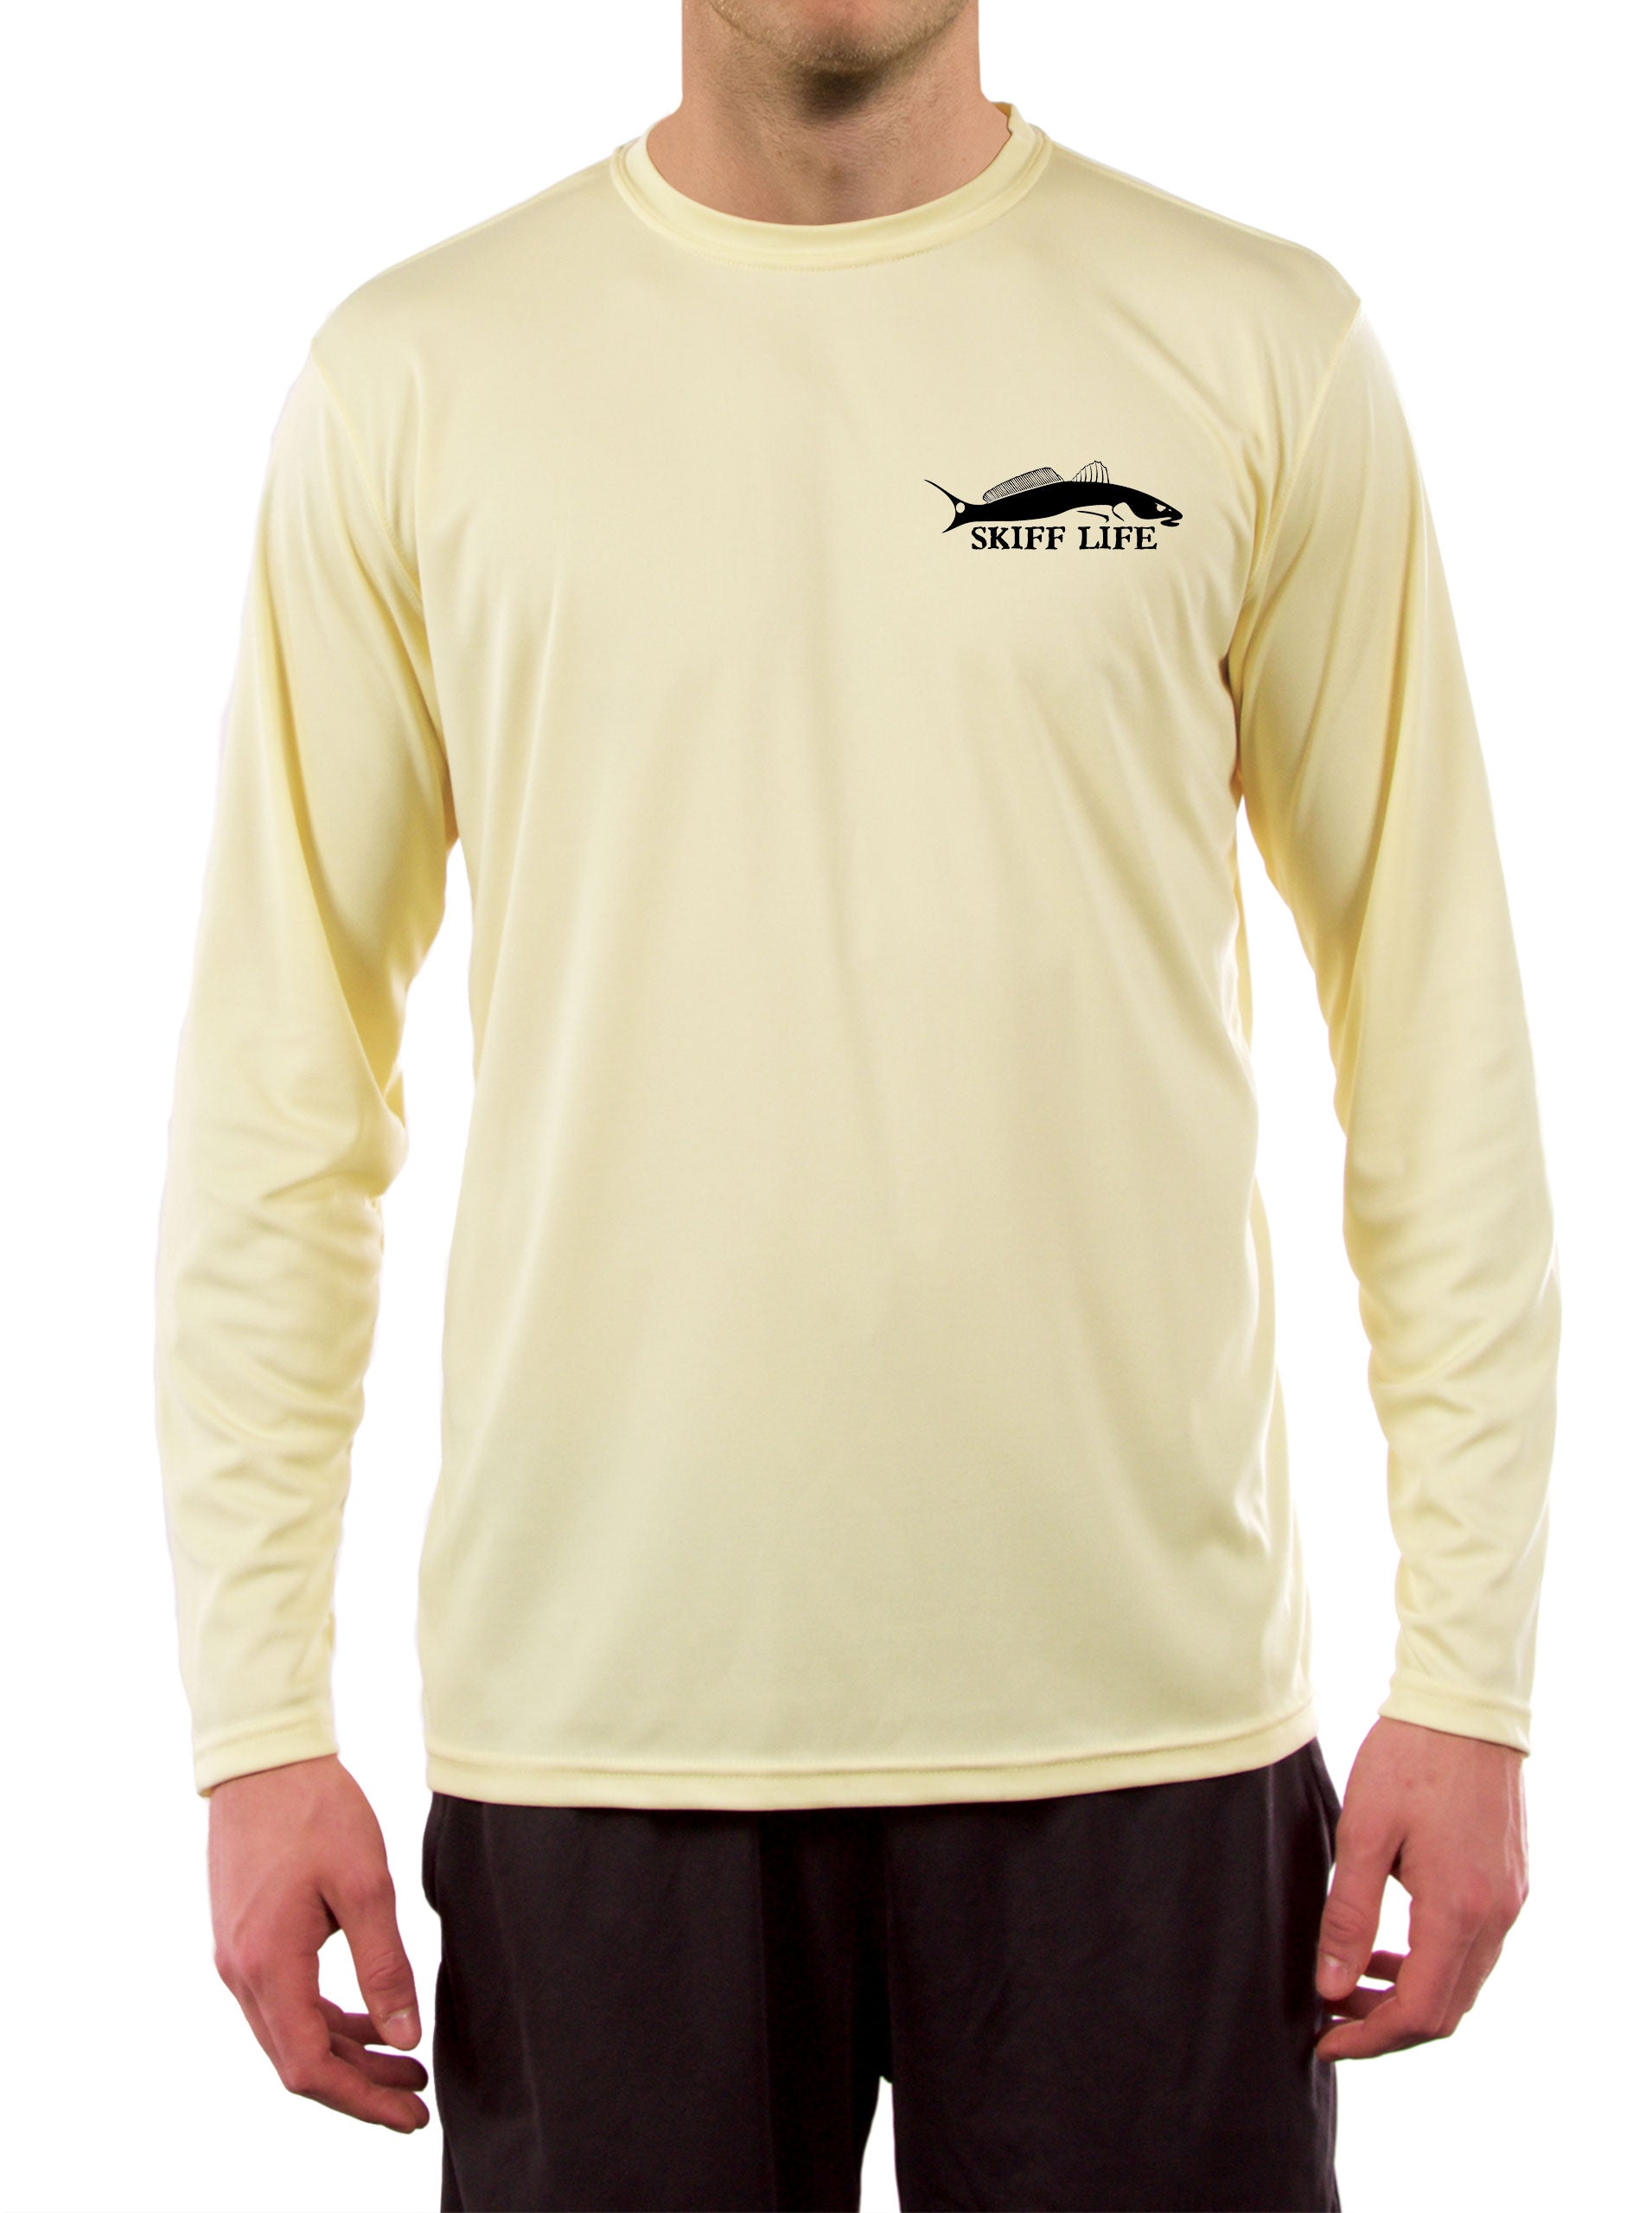 Spotted Sea Trout Chasing Baitfish Fishing Shirts Men's Quick Dry